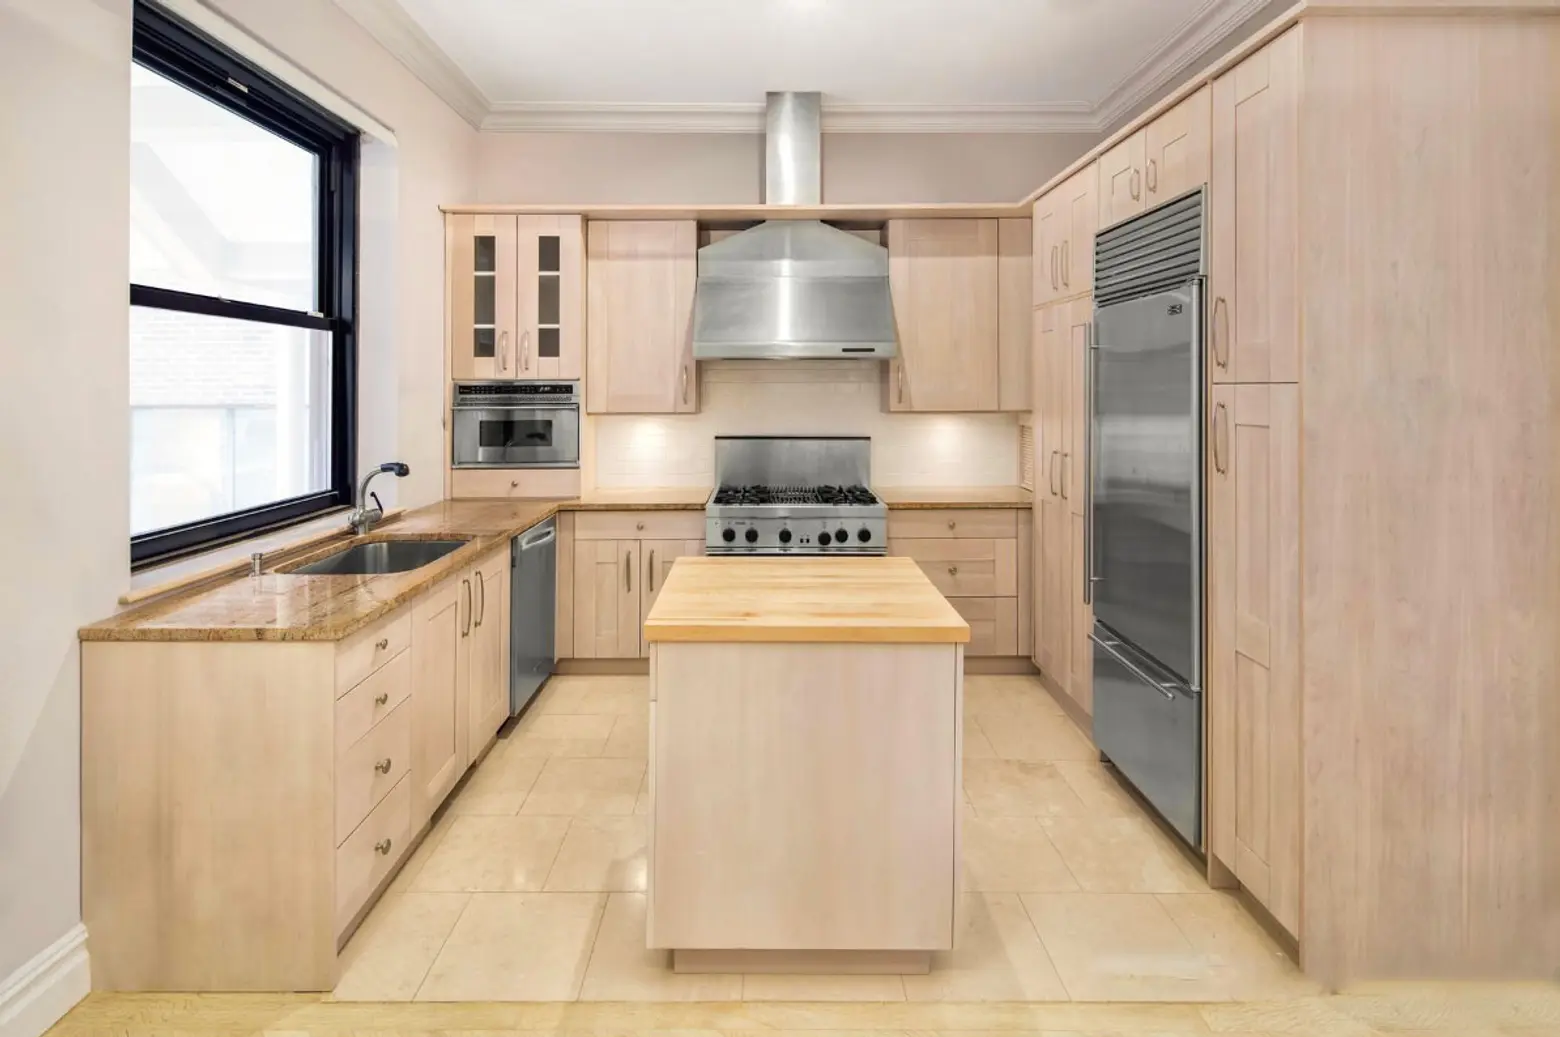 250 Mercer Street, Jessica Chastain, NYC celebrity real estate, duplexes